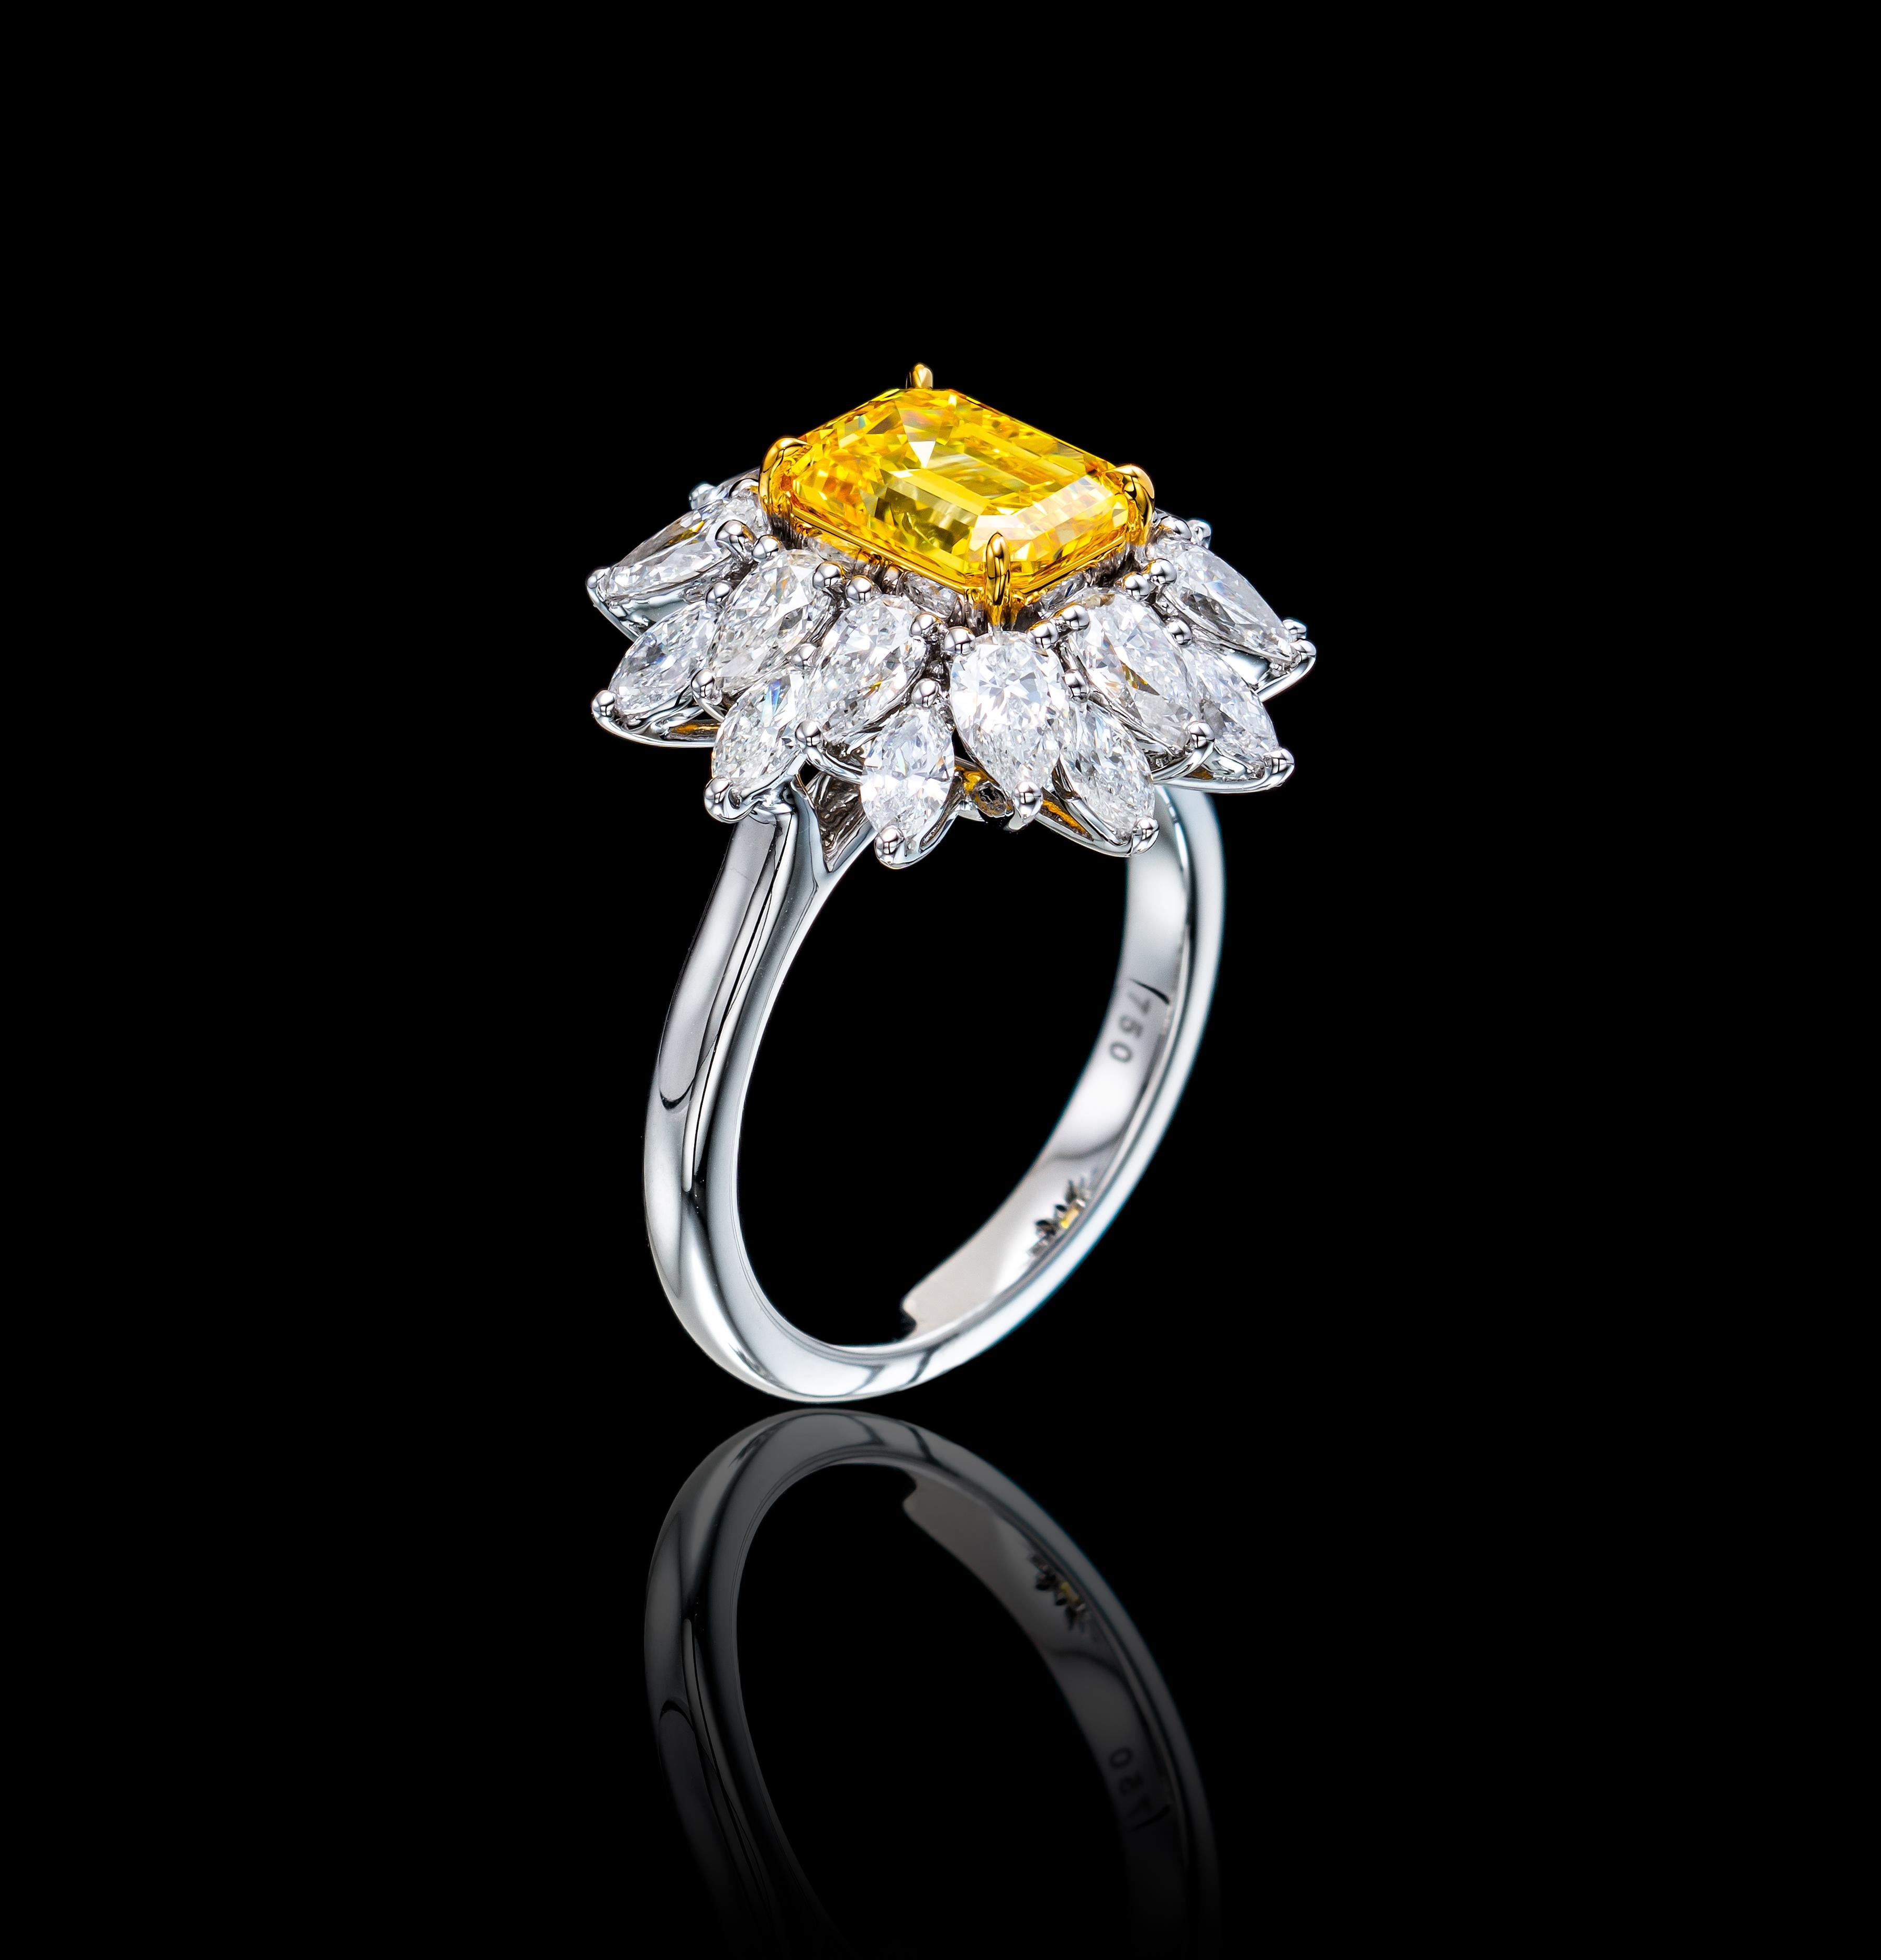  Inspired  by the Victorian era, this hand crafted floral ring is graced with timeless glamour. 
Showcasing a dazzling 2.01 Emerald Cut Fancy Vivid Yellow Diamond / VS2 and accented by 2.29 Carat of 20 E-F/ VVS mixed shaped diamonds. 
The